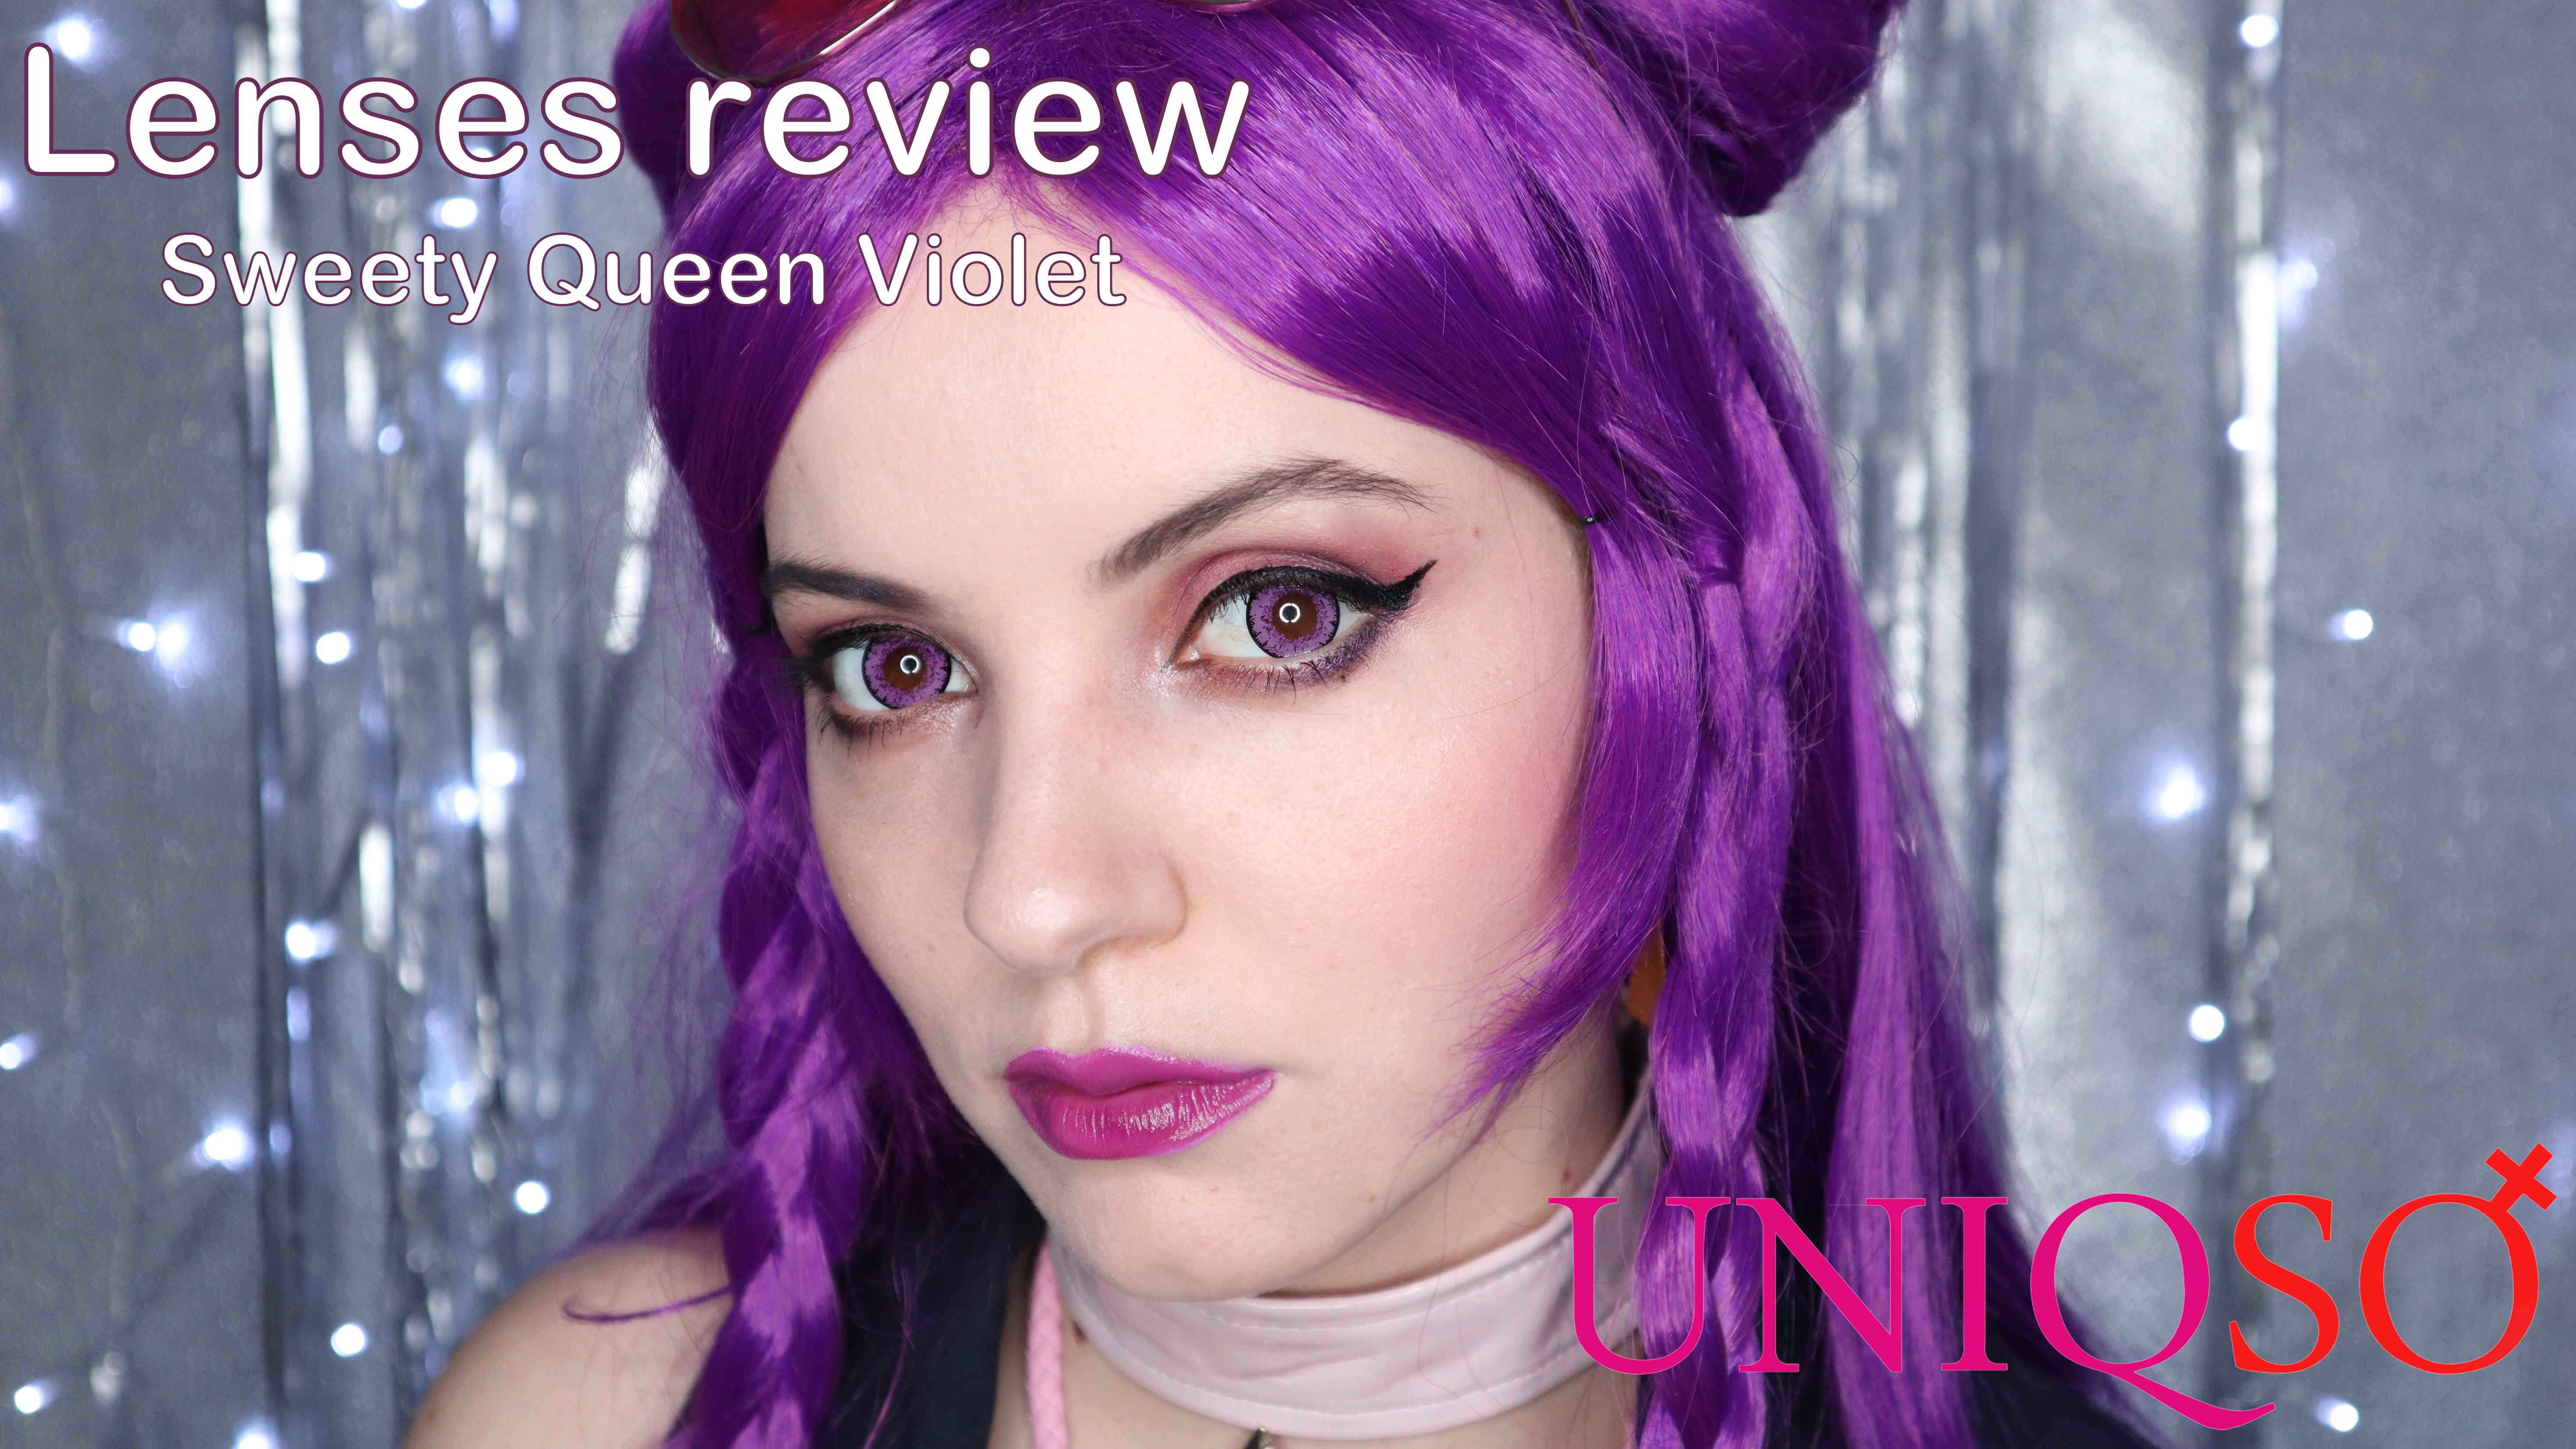 Lens review: Sweety Queen Violet from Uniqso